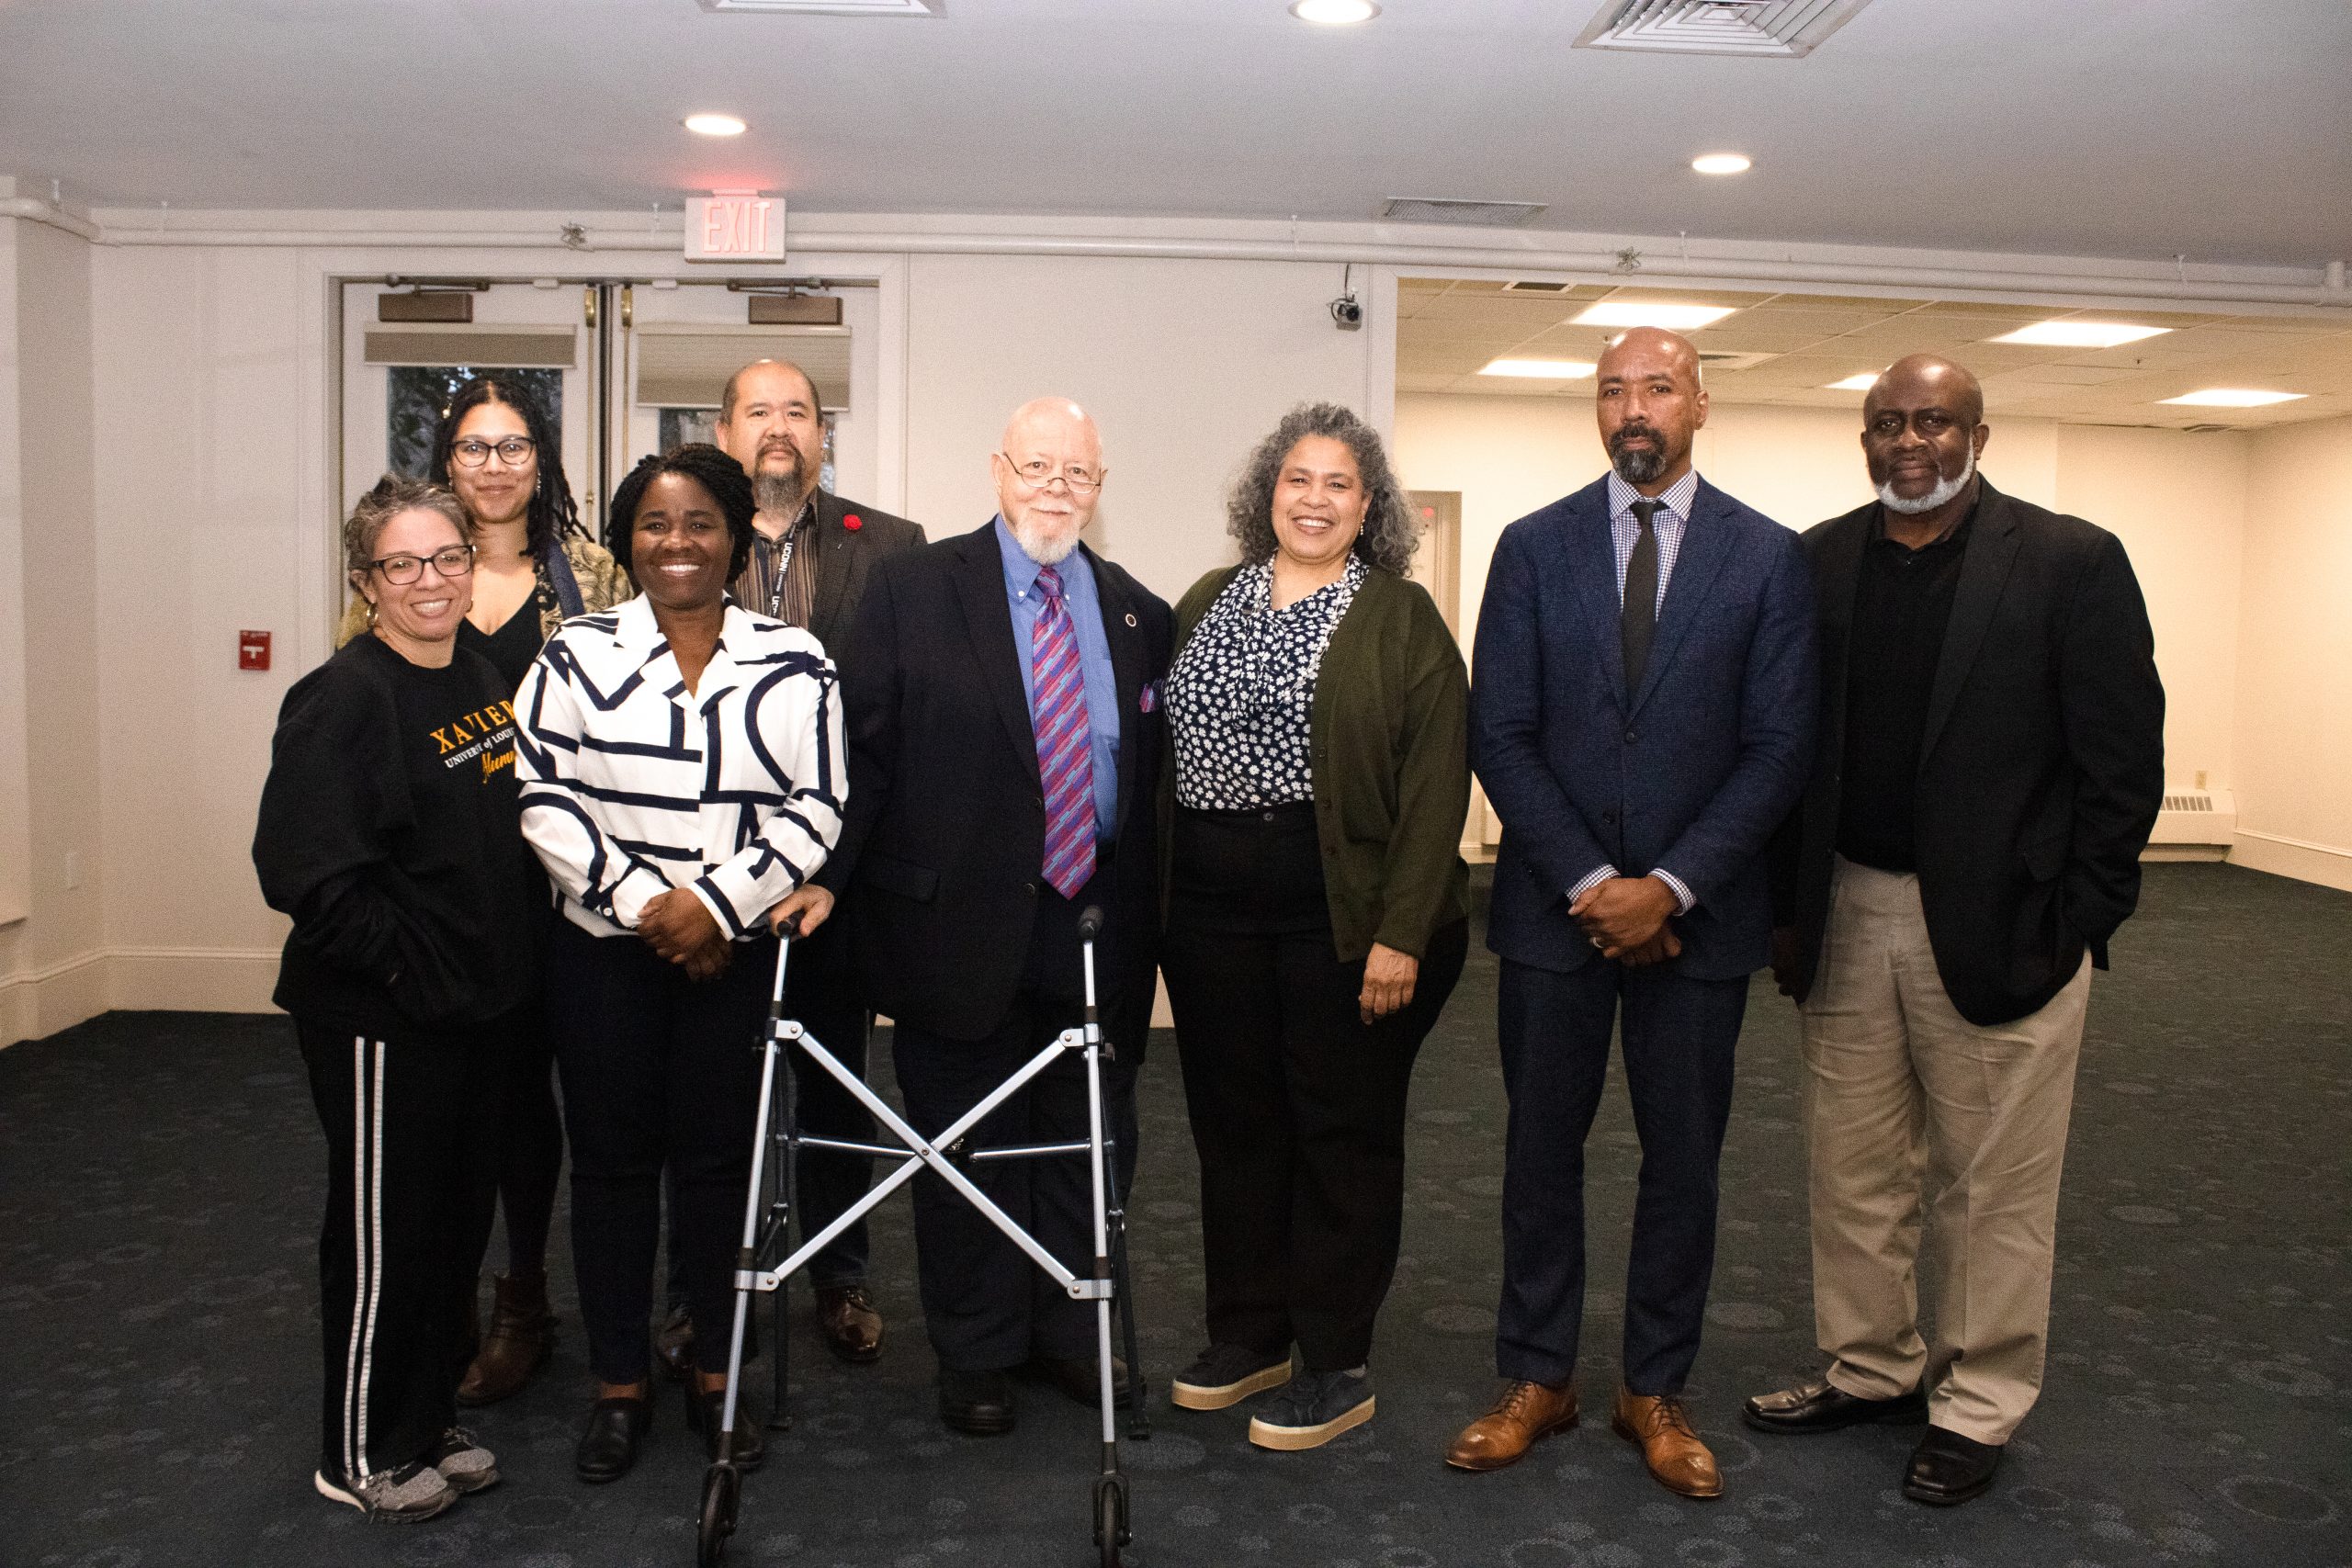 ASI Staff and Dr. Molette at the Mollette Dinner 2023: A group of eight individuals stands in a line indoors for a photo, with one of them using a mobility aid, a walker. They are dressed in a mixture of formal and casual attire. The background features an exit sign above a door on the left.